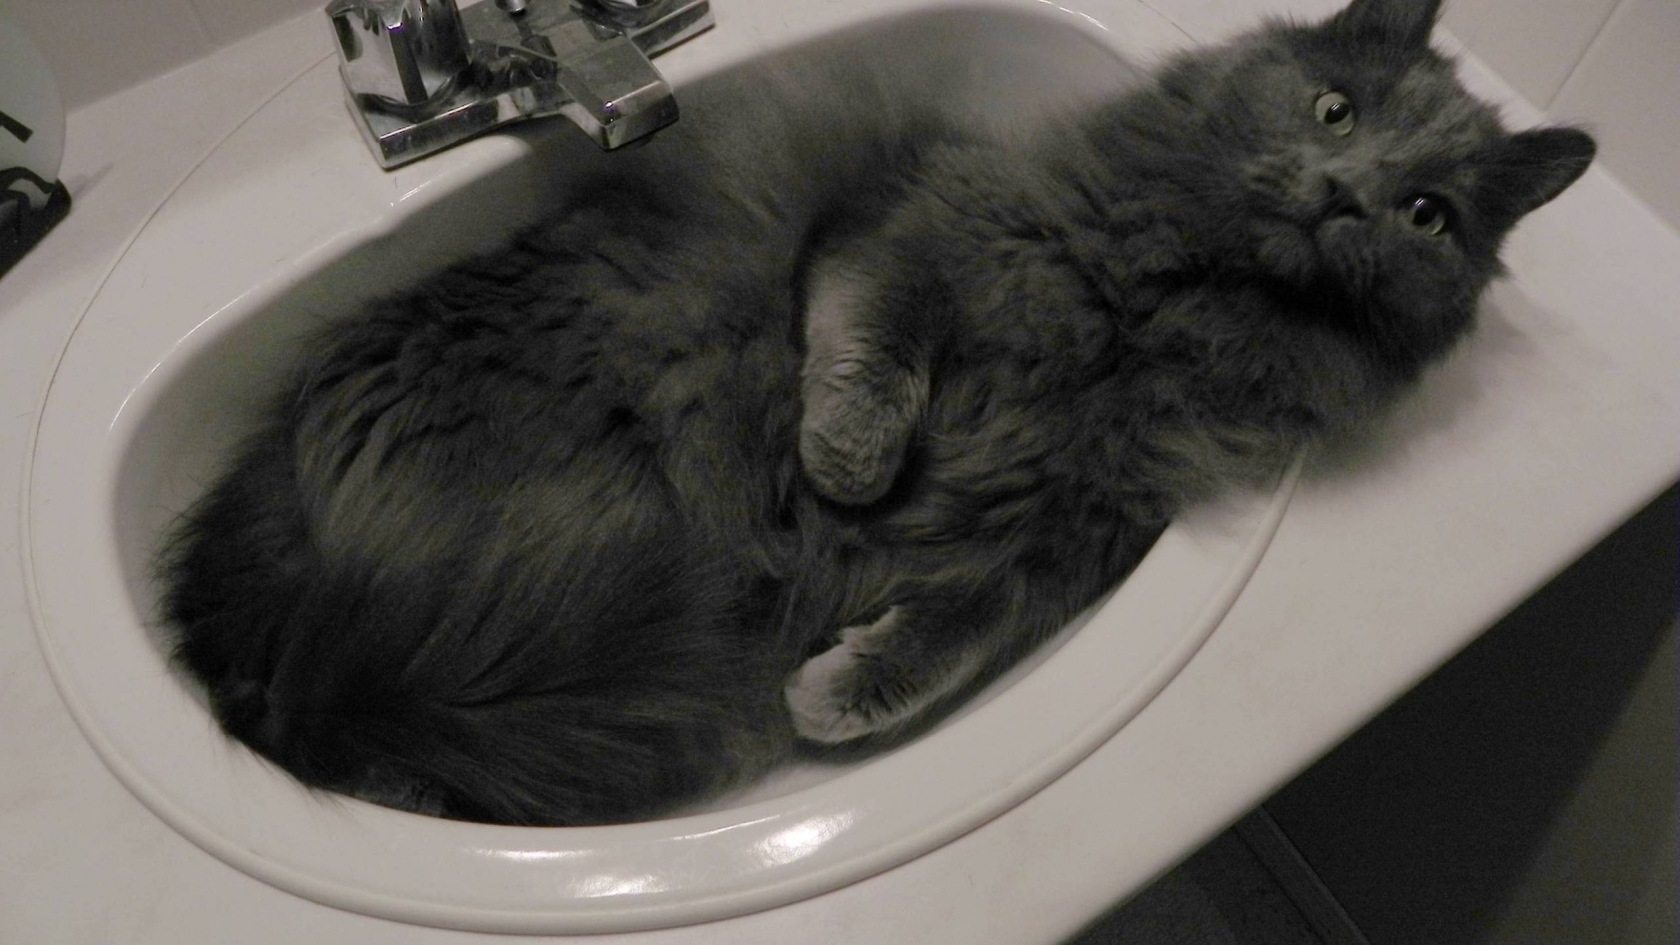 Nebelung Cat in Sink for 1680 x 945 HDTV resolution